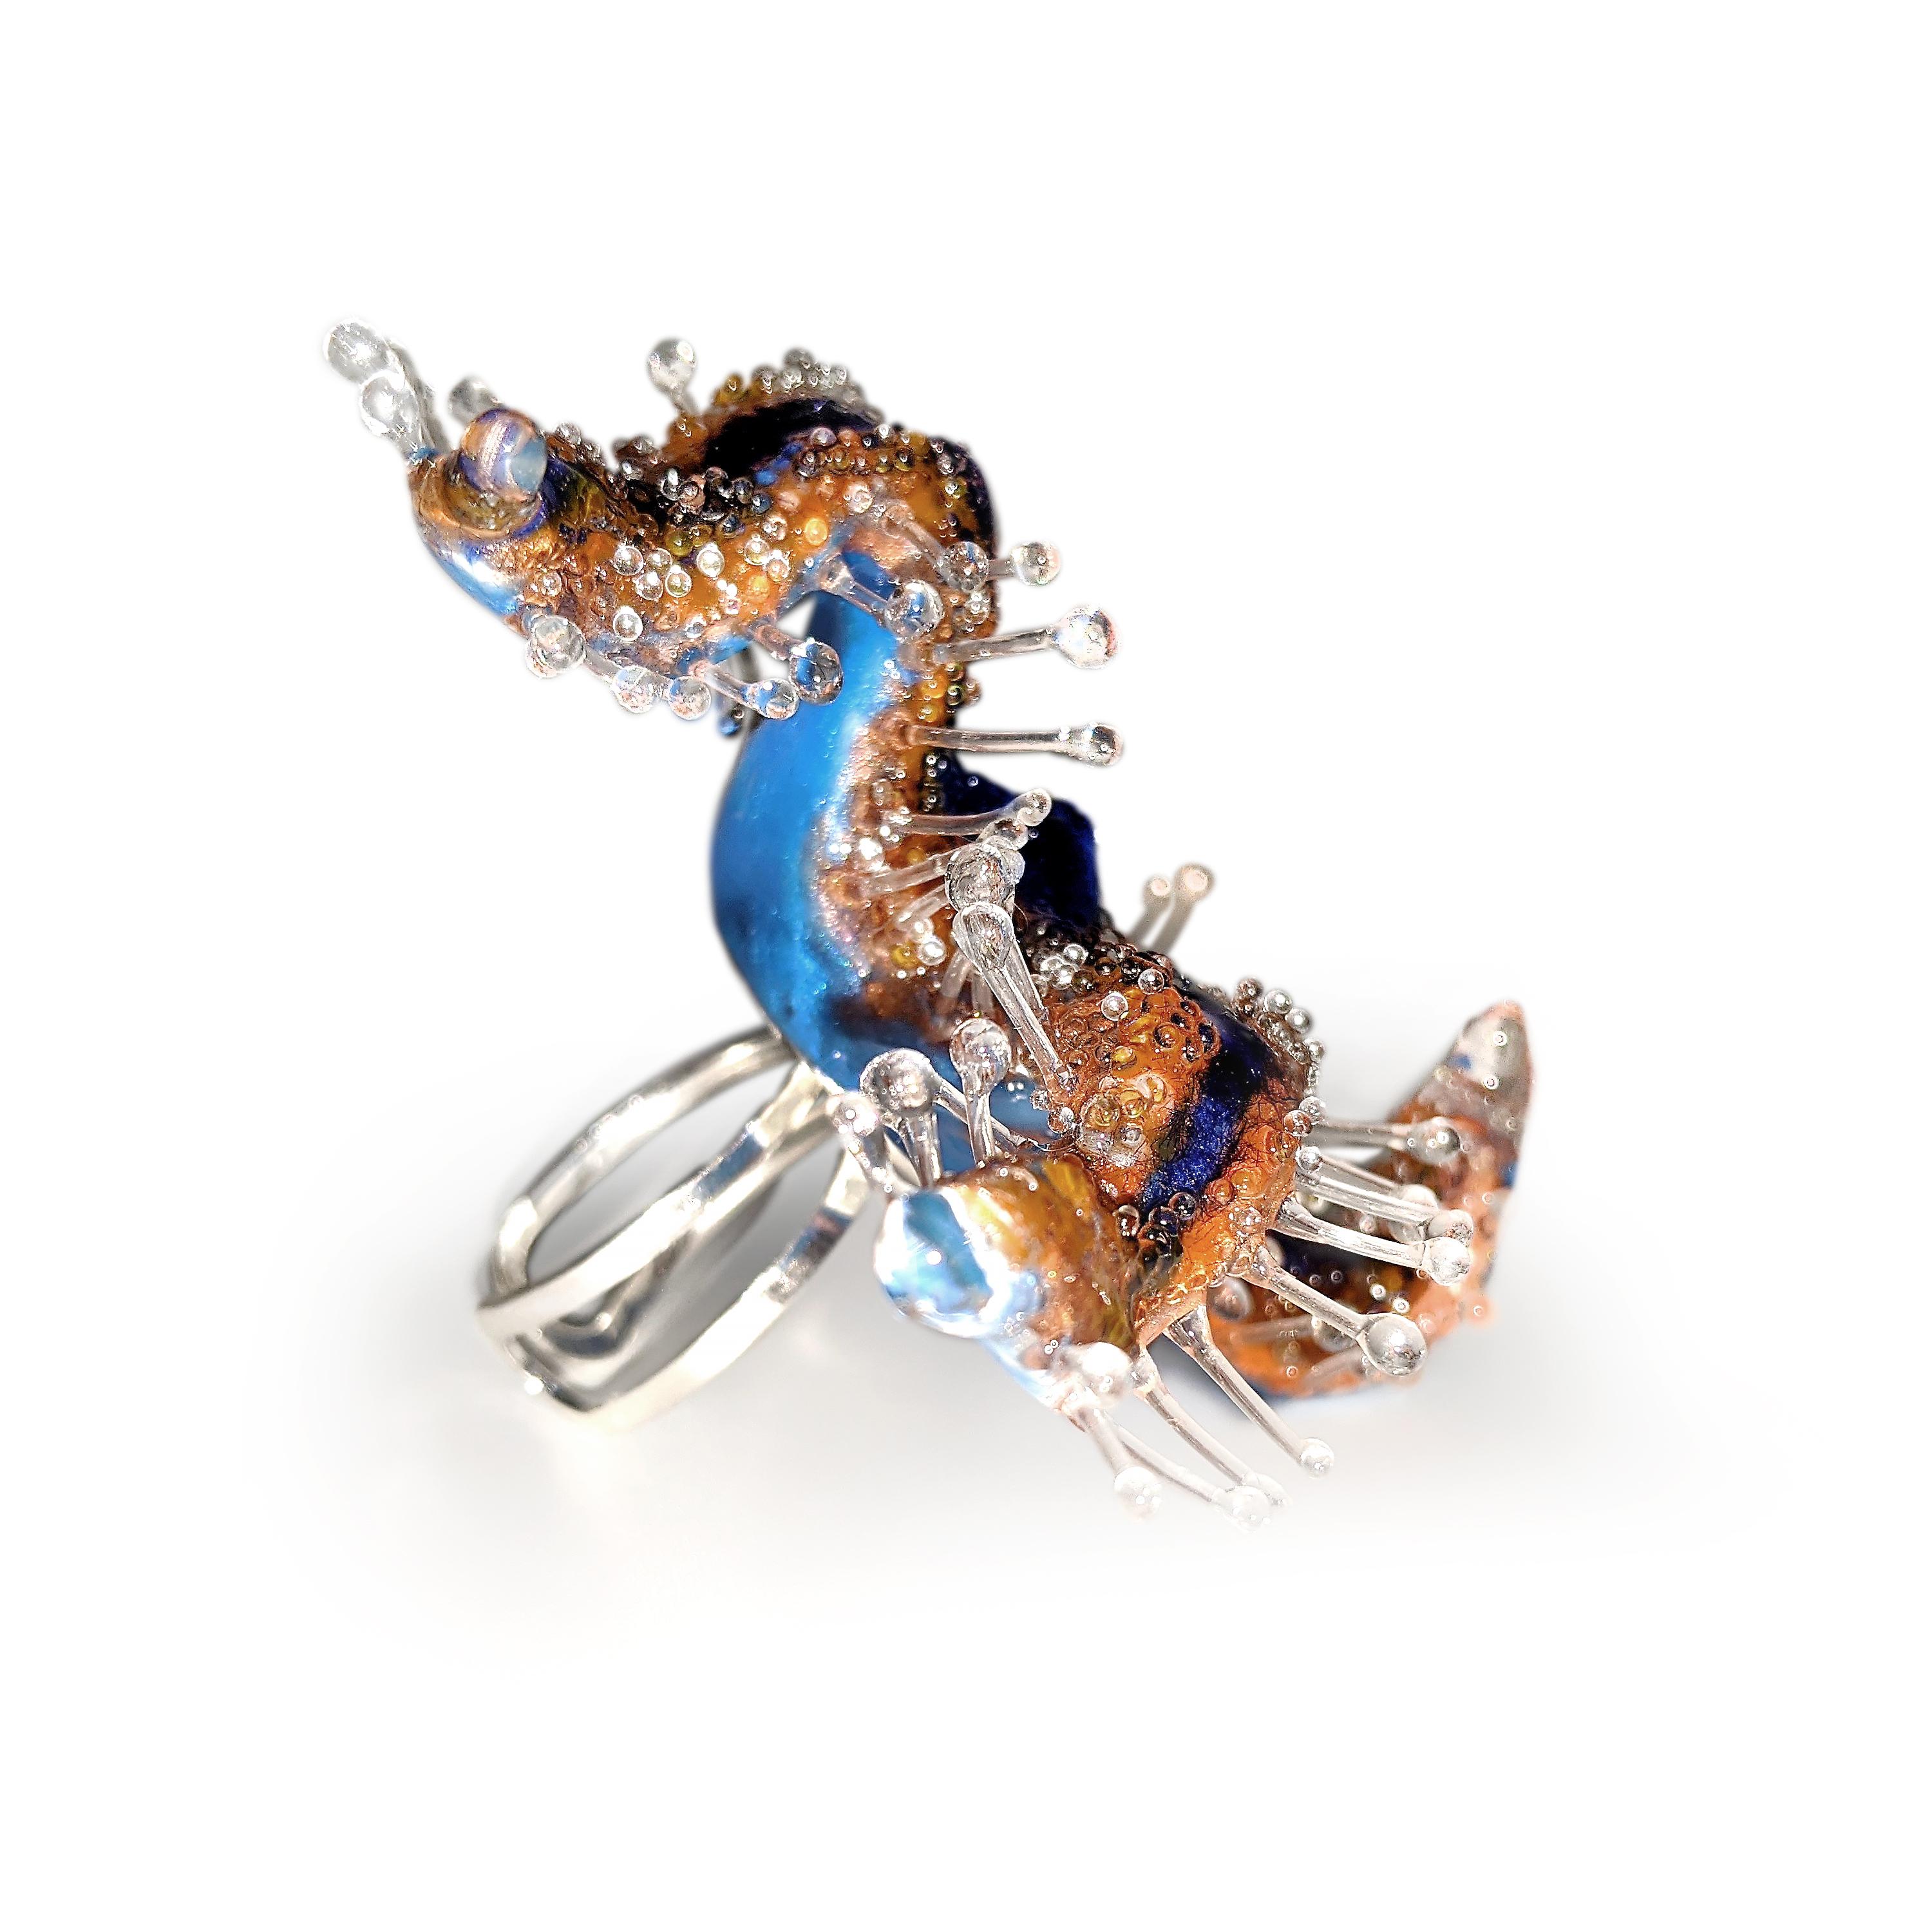 Royal Starfish Ring .  Sea Life Series, 2020. 
Handcrafted. One-of-a-kind sculptural jewelry. Inspired by the universe under the sea. 

Made from polymer clay, resin, pigments, reflective glass beads, mini rhinestones, glass globes, and Silver